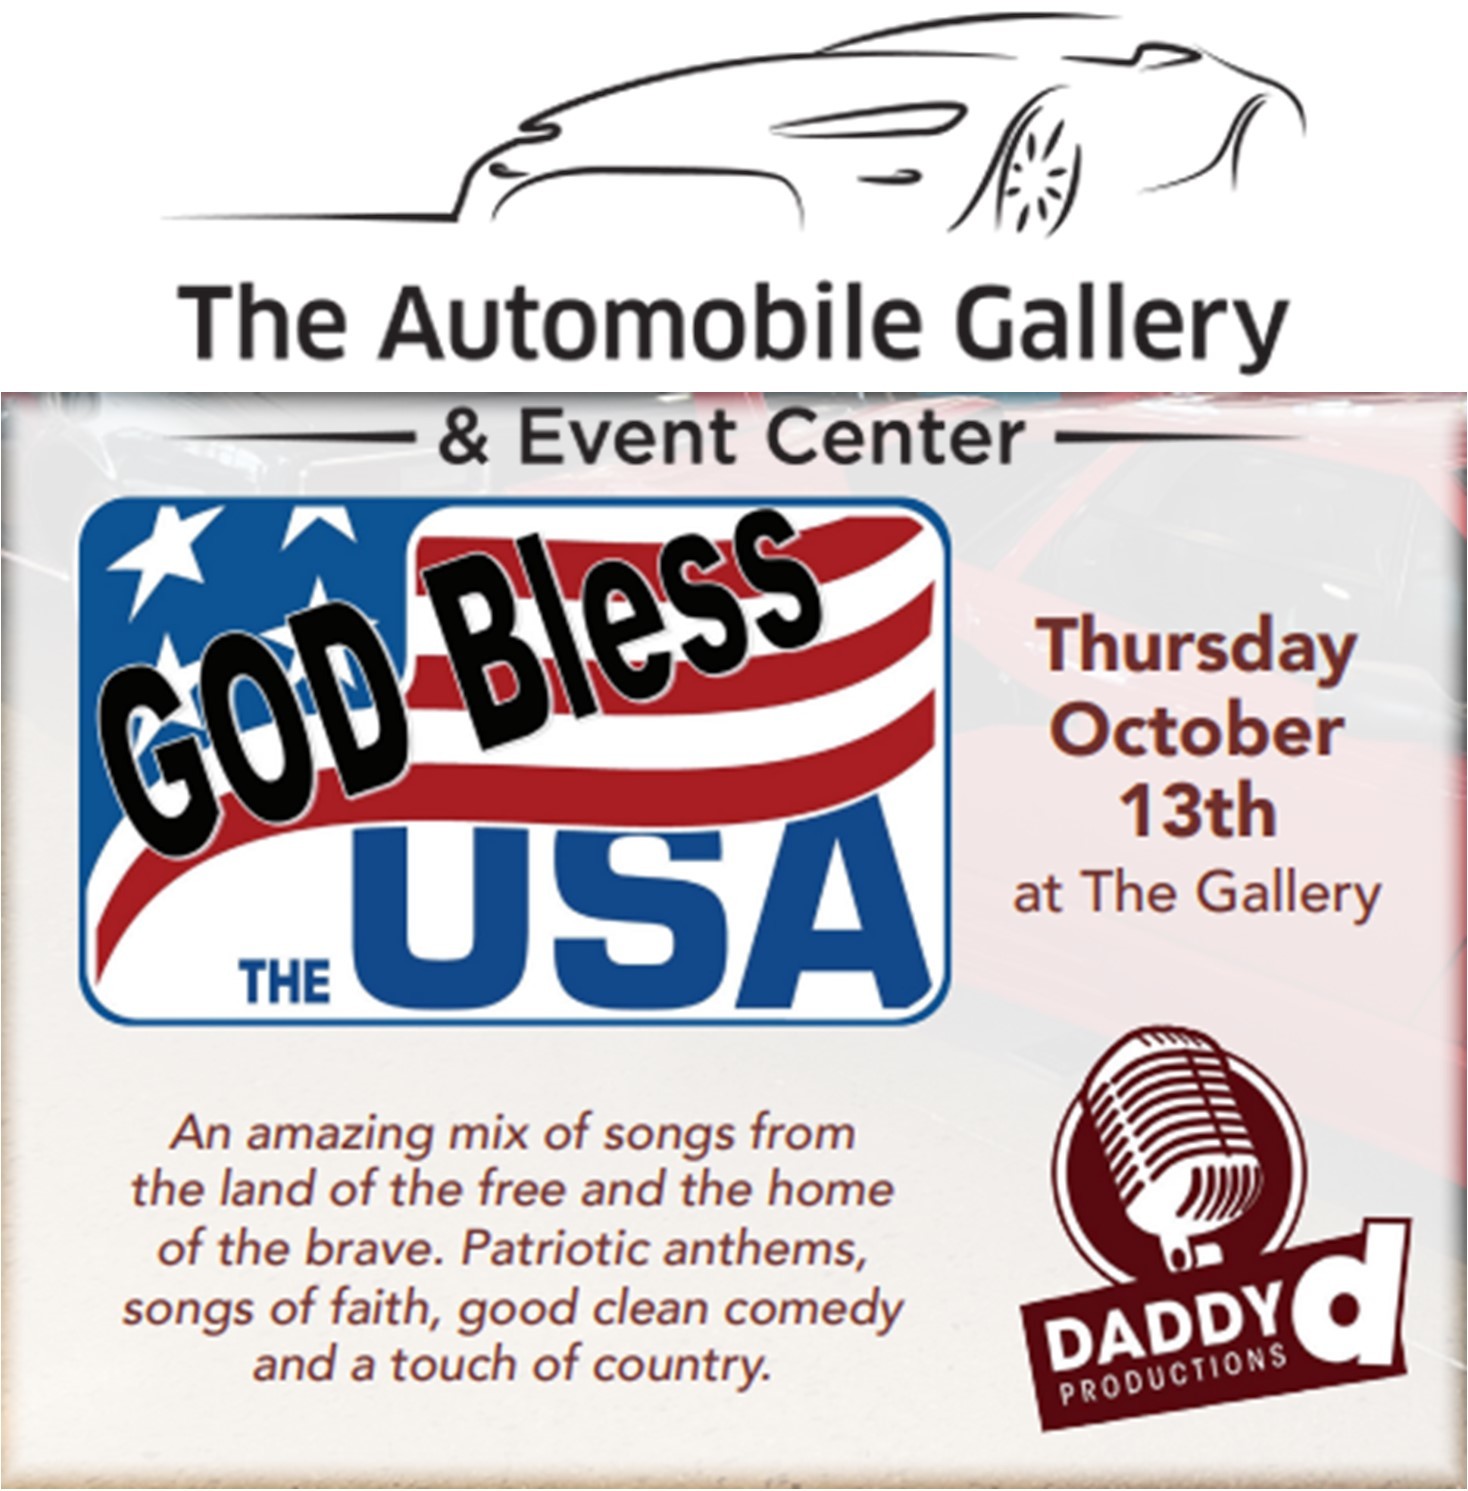 Automobile Gallery "God Bless The USA" October 13th